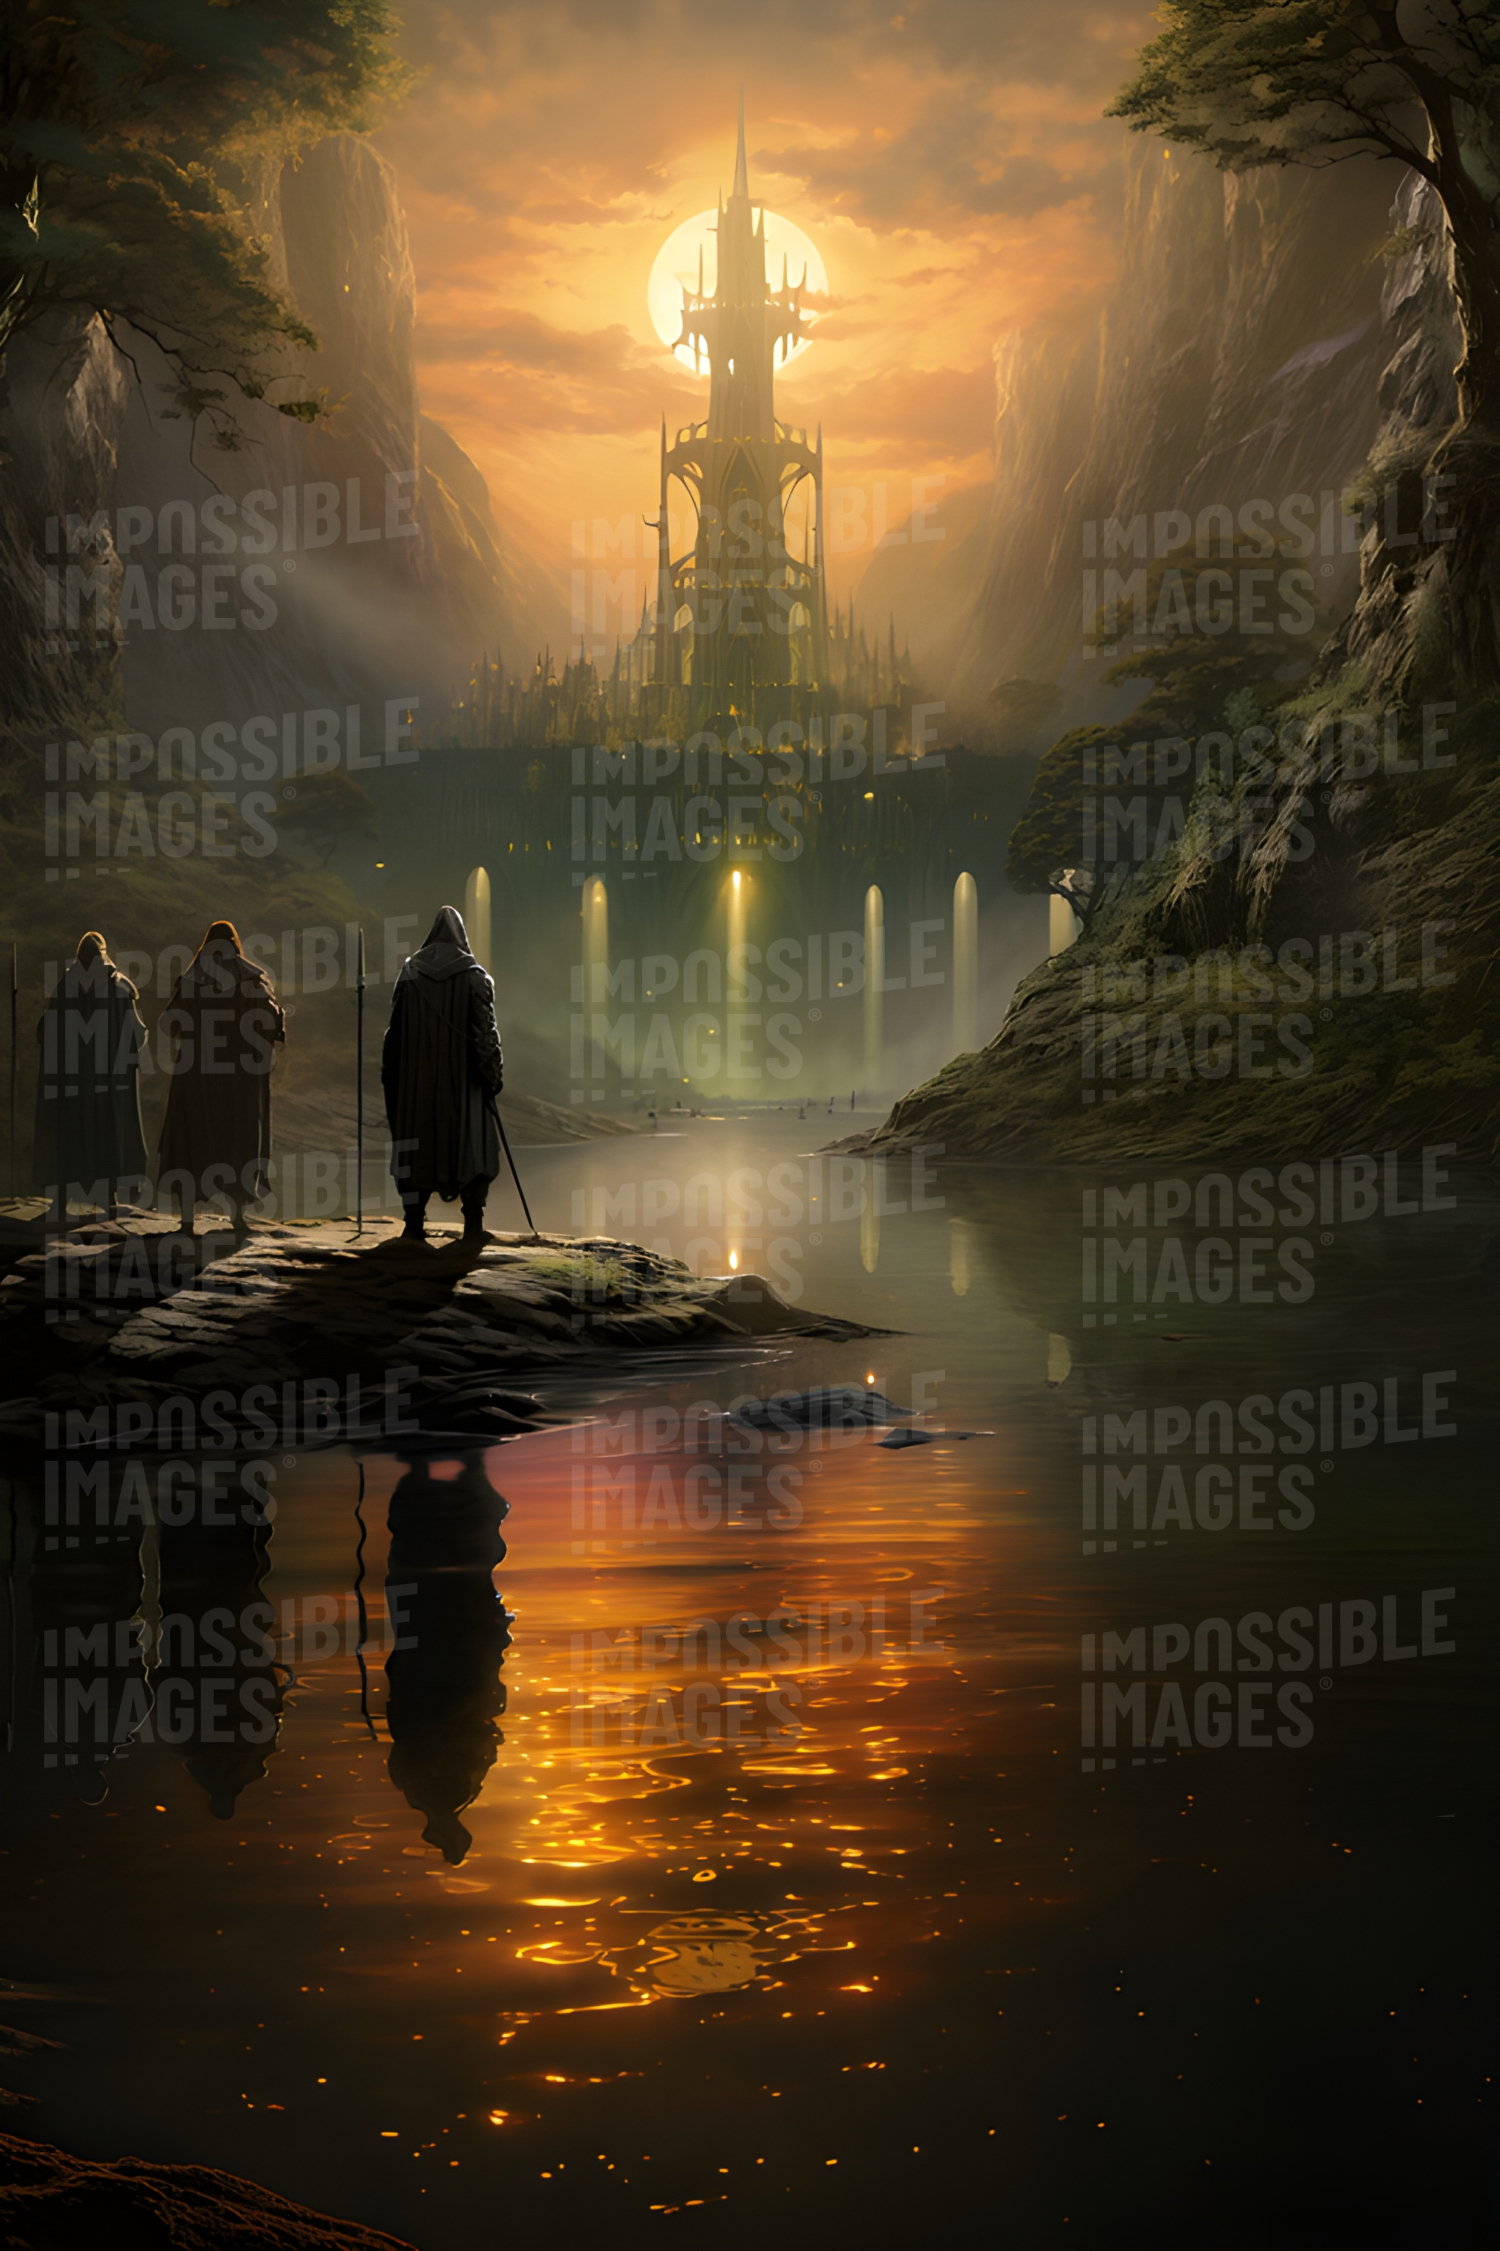 Fantasy concept art painting depicting three cloaked travellers looking at an amazing alien building facing them across a lake against a dramatic sunset -  Fantasy concept art painting of three cloaked travellers admiring an alien building across a lake at sunset, illuminated by a dramatic sky.